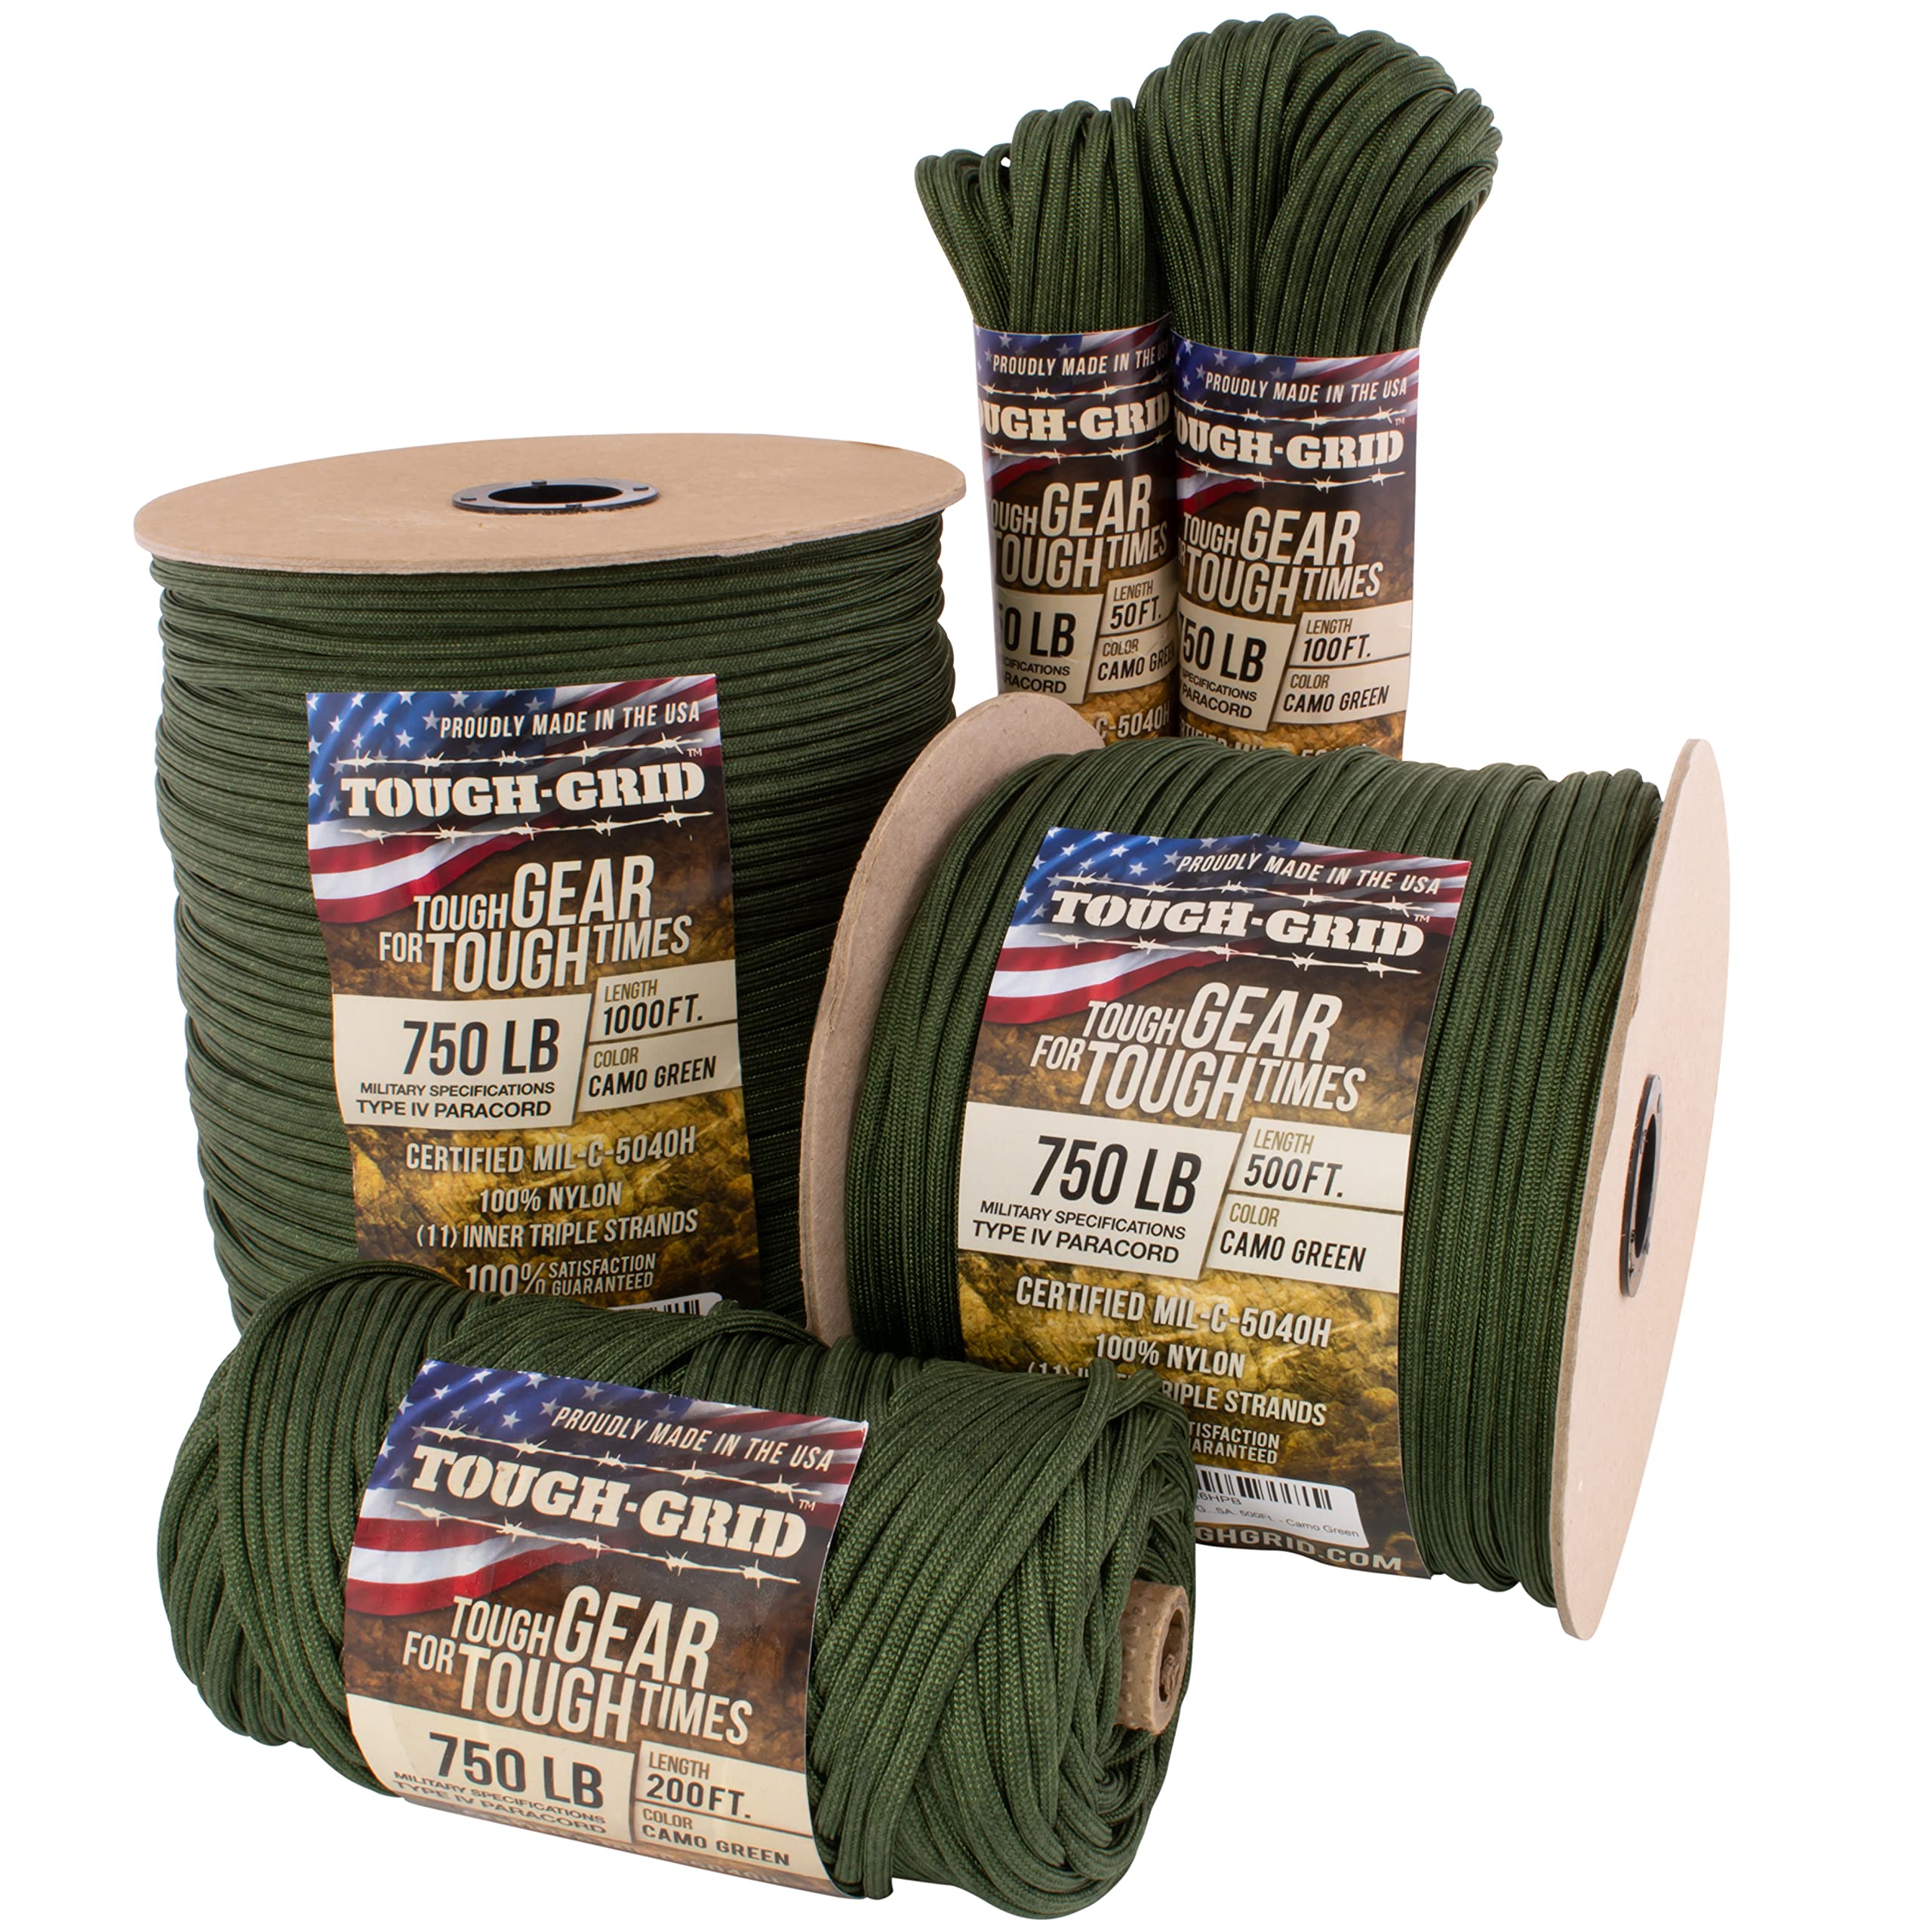 TOUGH-GRID 750lb Paracord Parachute Cord - Genuine Mil Spec Type IV 750lb  Paracord Used by The